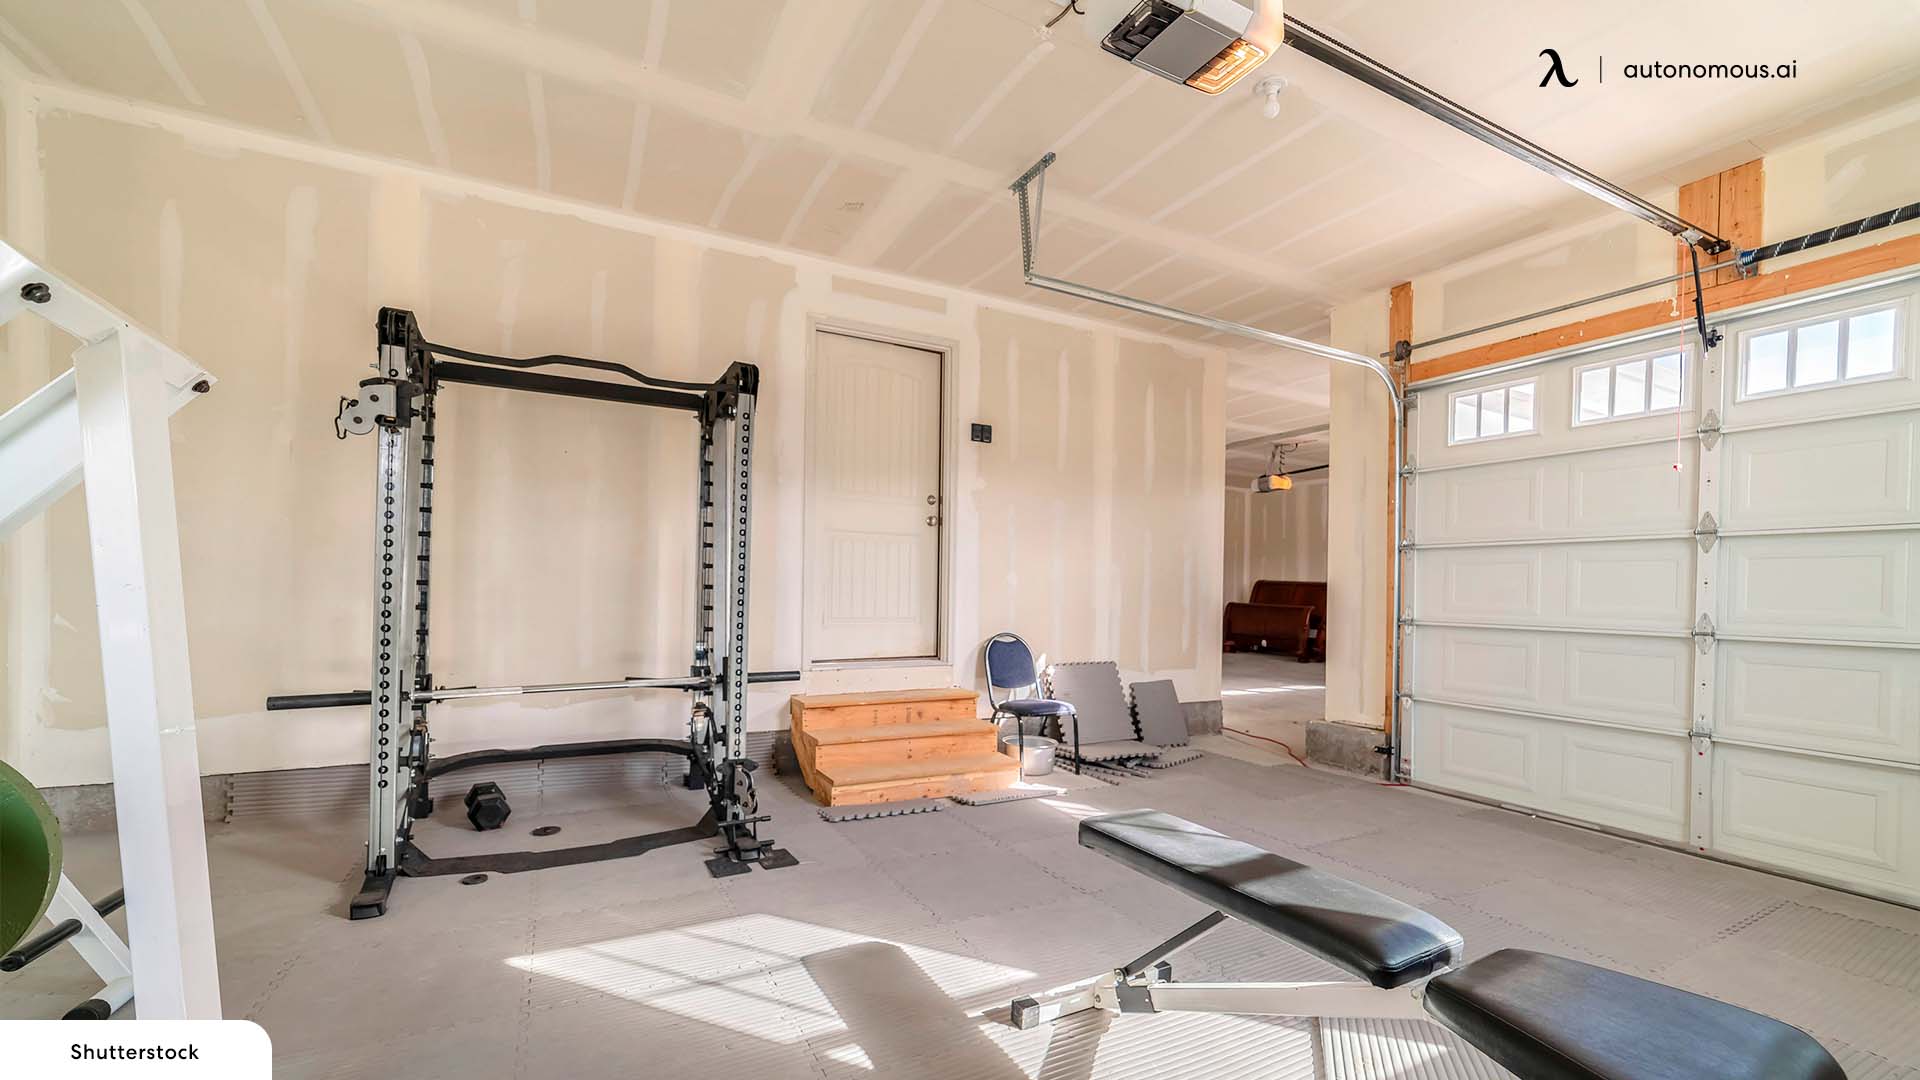 A Two-Car Combo garage gym ideas